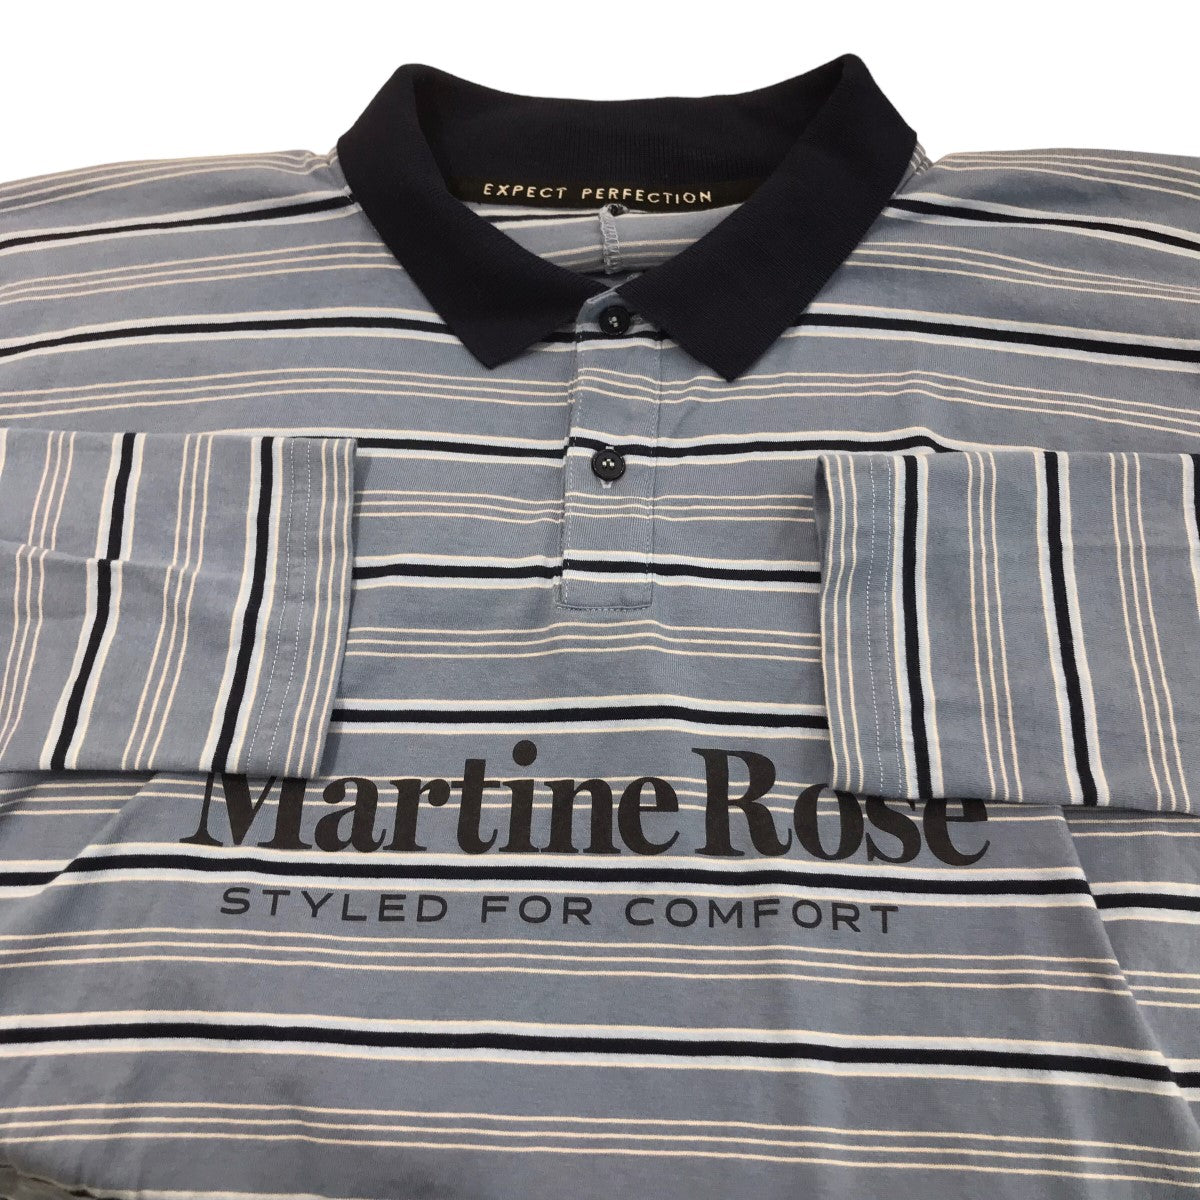 Martine rose(マーティンローズ) L S PULLED NECK POLO in BLUE STRIPEボーダーボーダーポロシャツ